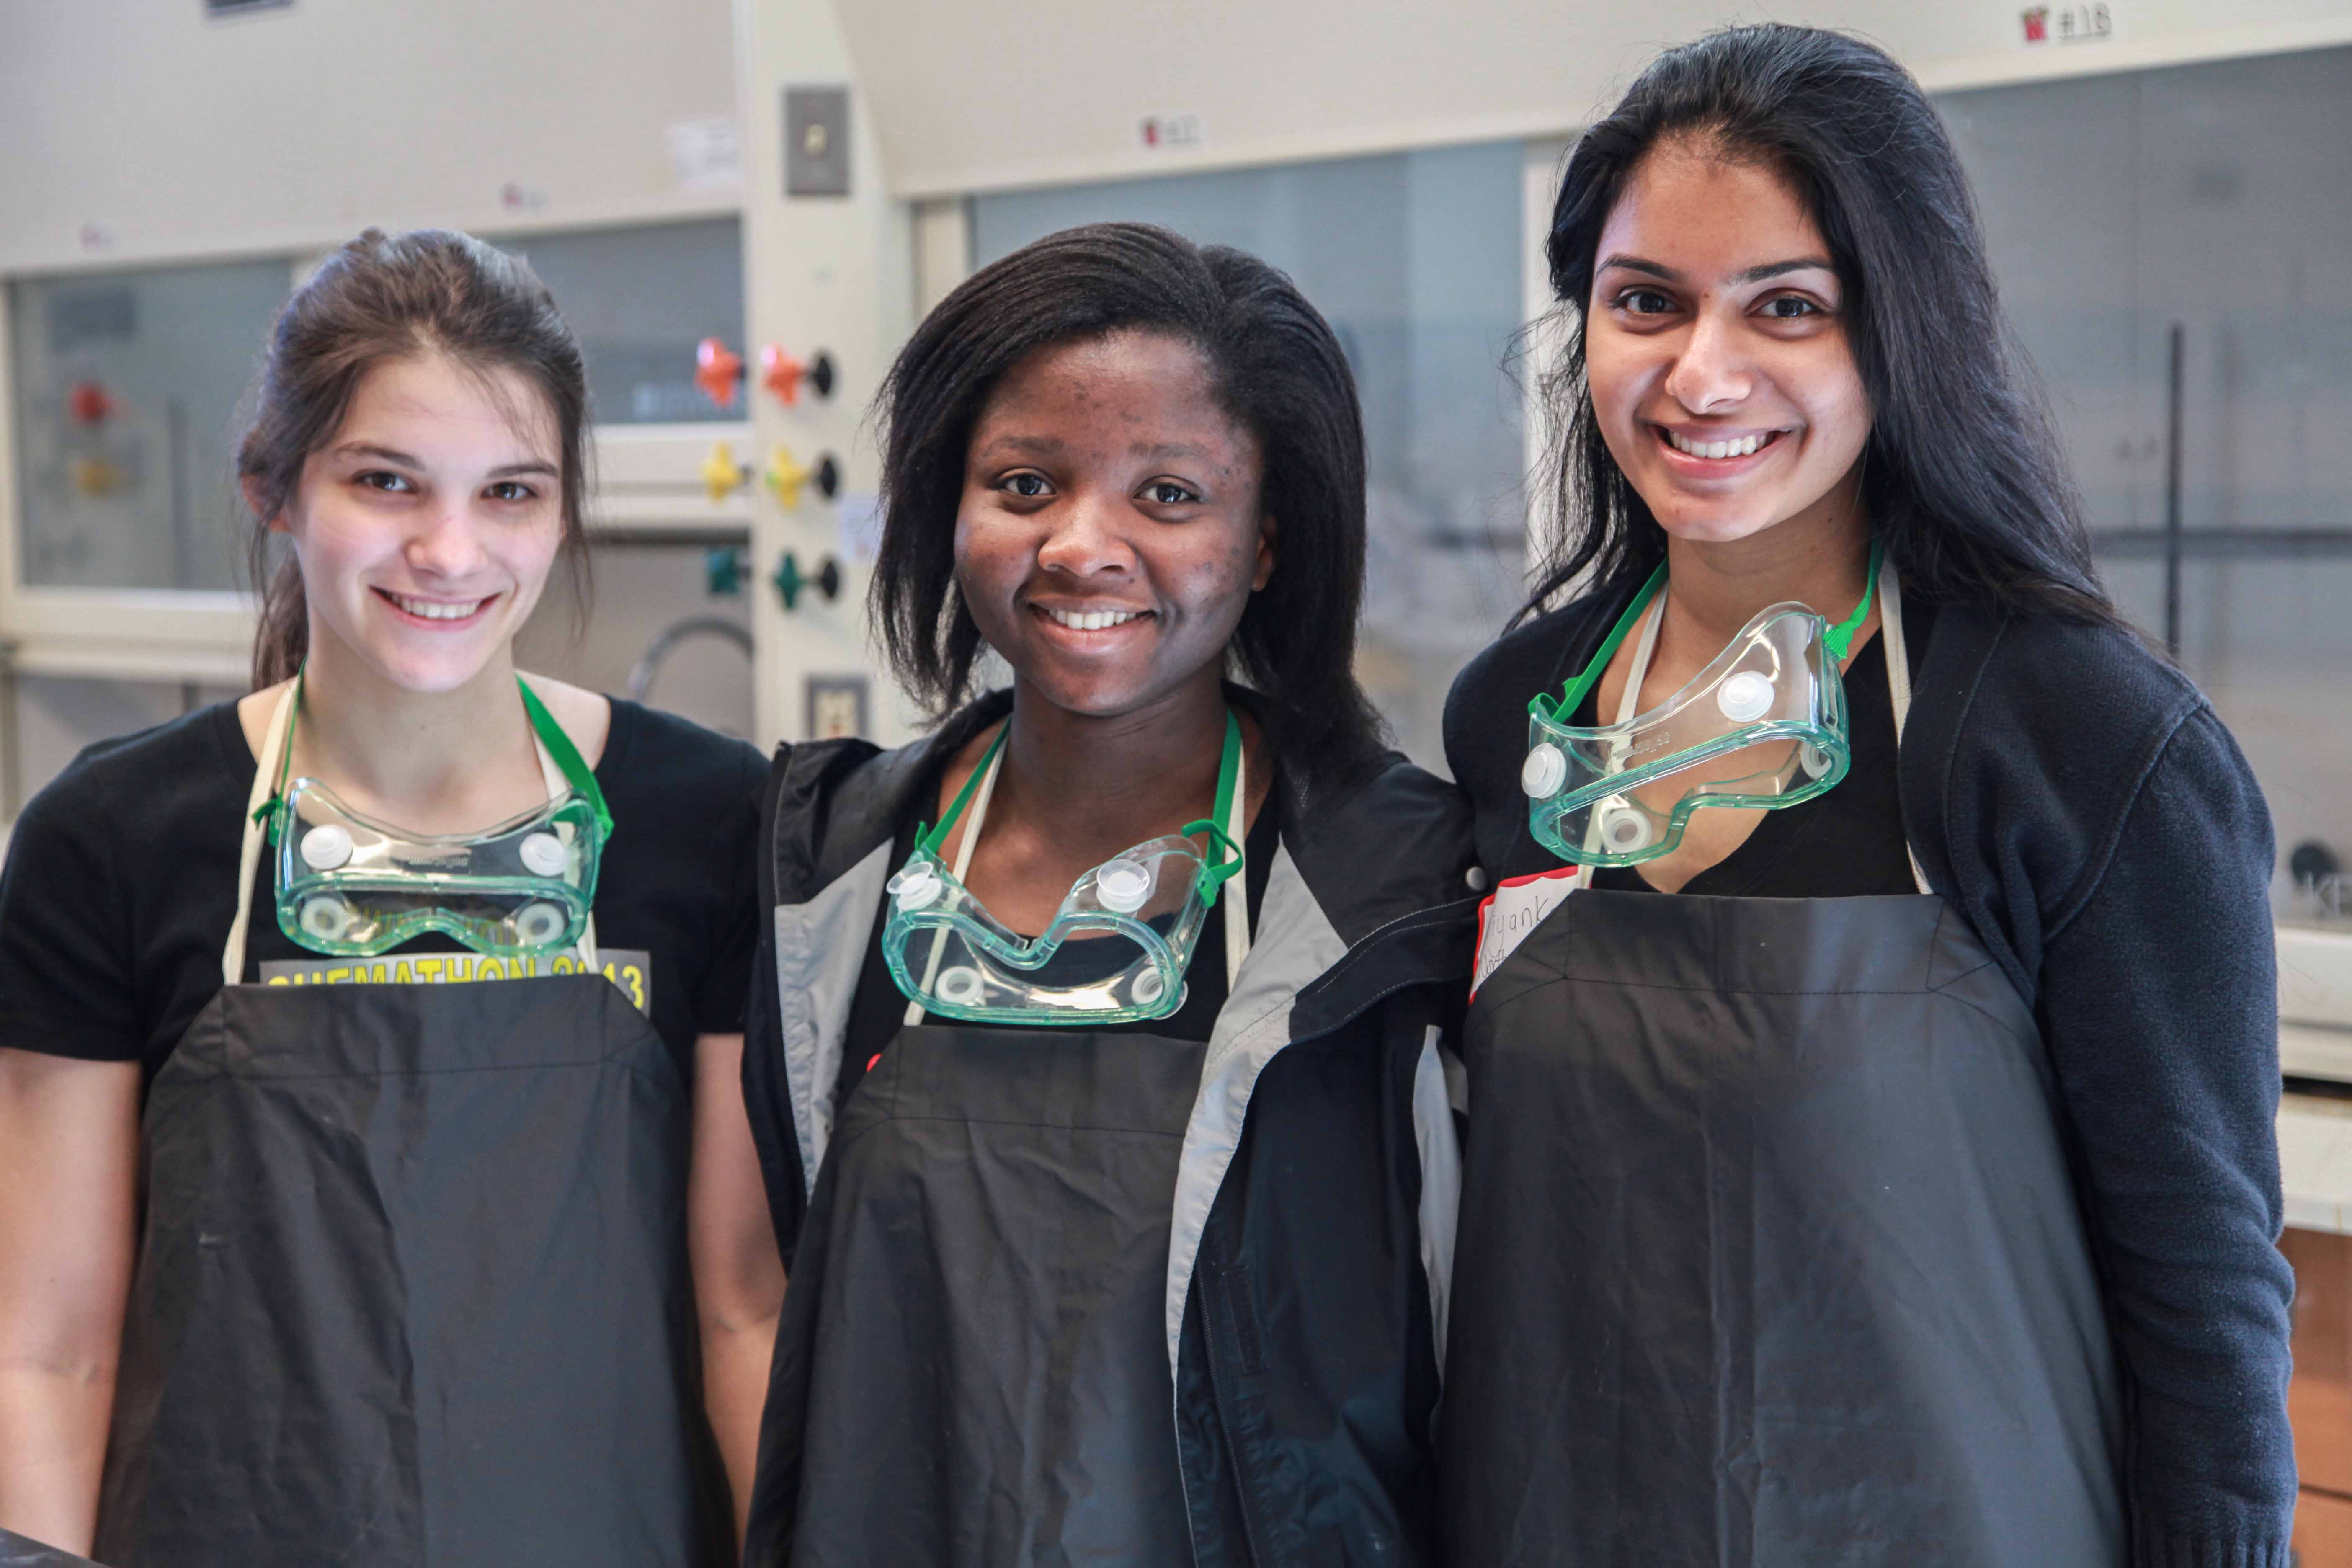 Three young women participating in Chemathon, wearing protective aprons and goggles.